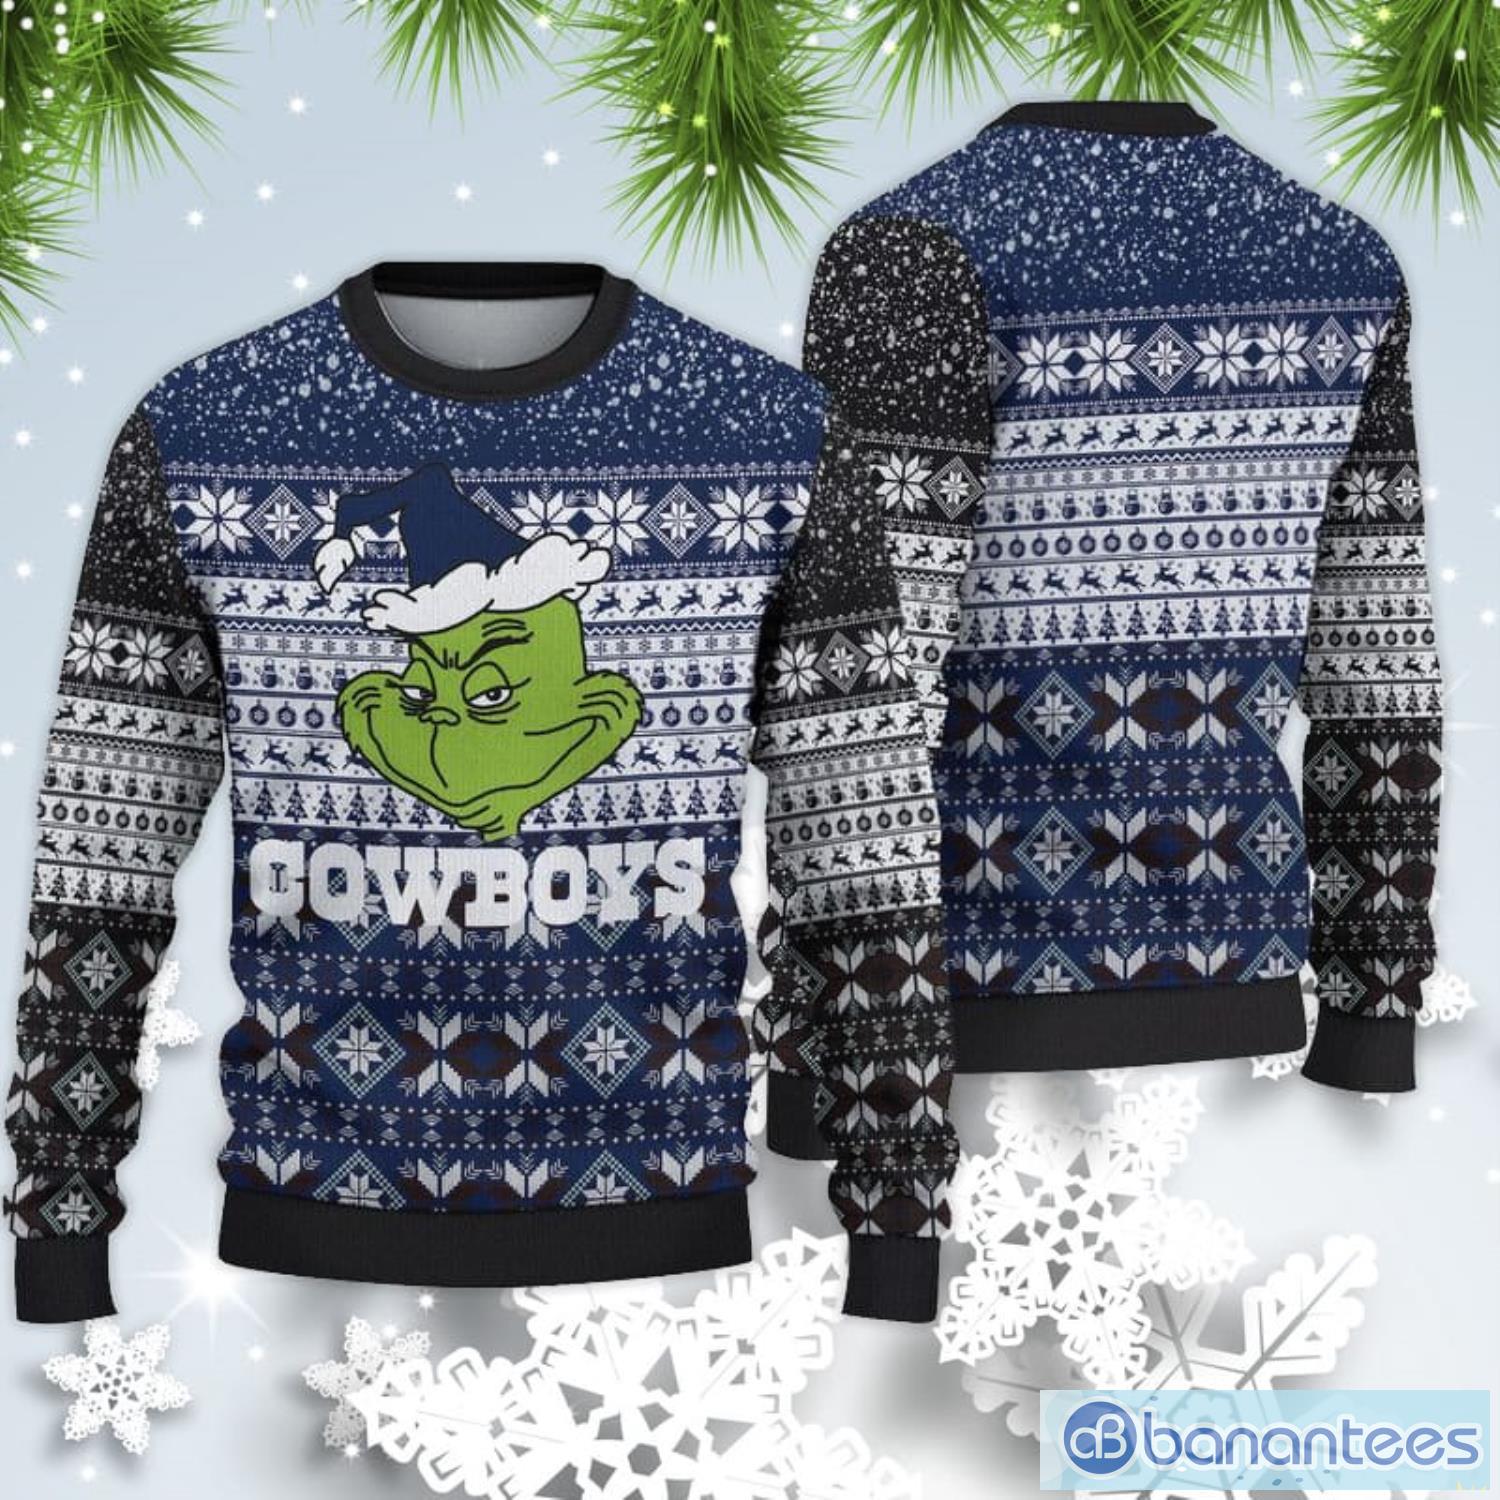 Dallas Cowboys Christmas Grinch Sweater For Fans - Banantees